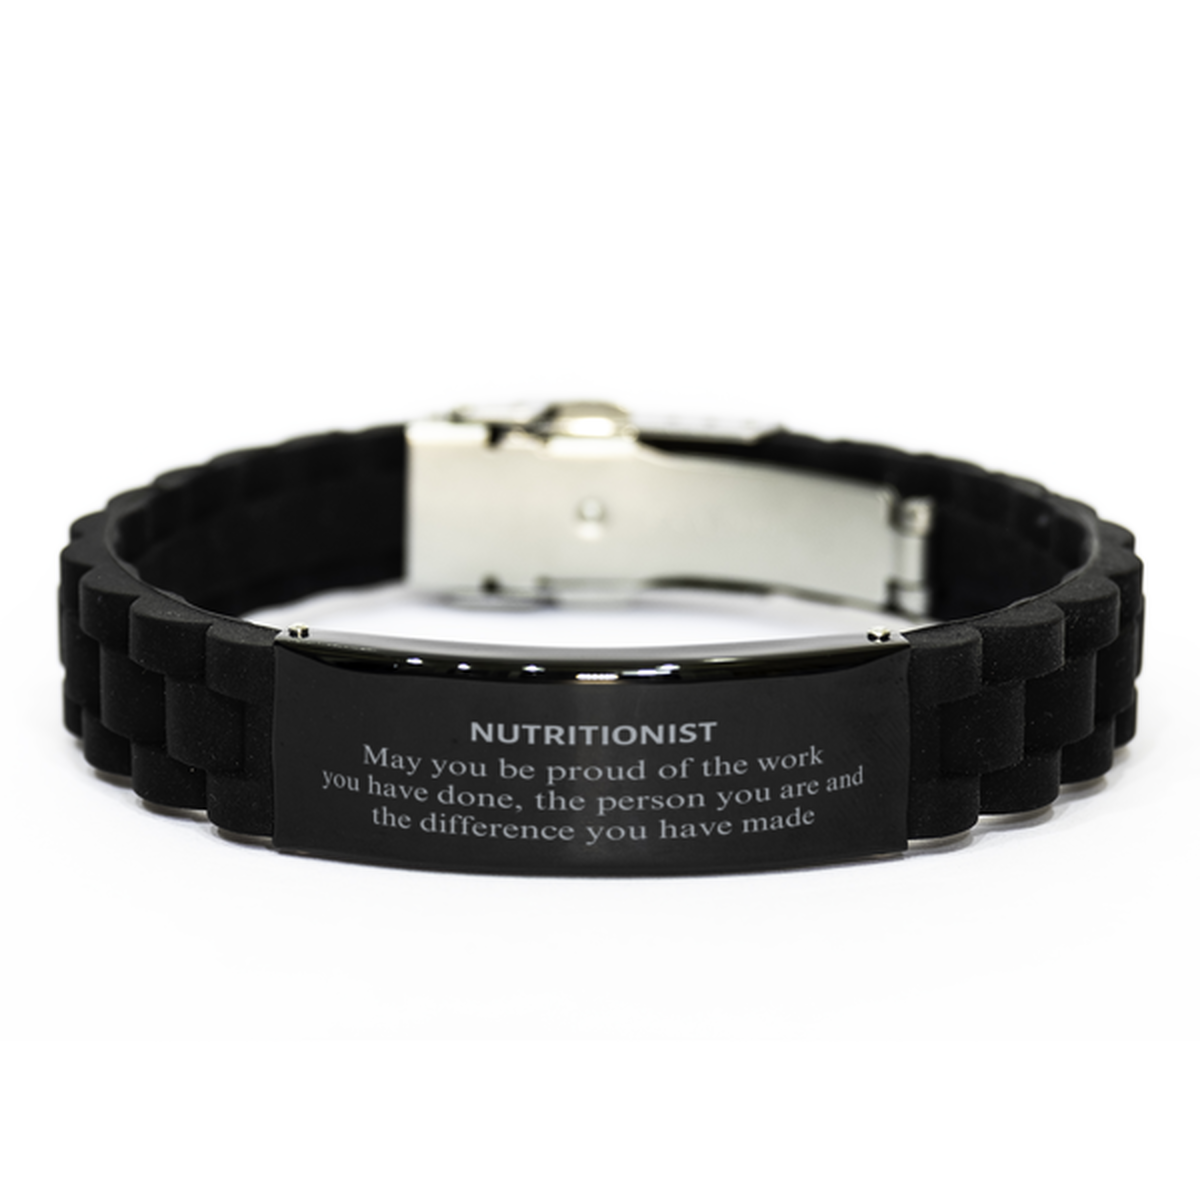 Nutritionist May you be proud of the work you have done, Retirement Nutritionist Black Glidelock Clasp Bracelet for Colleague Appreciation Gifts Amazing for Nutritionist